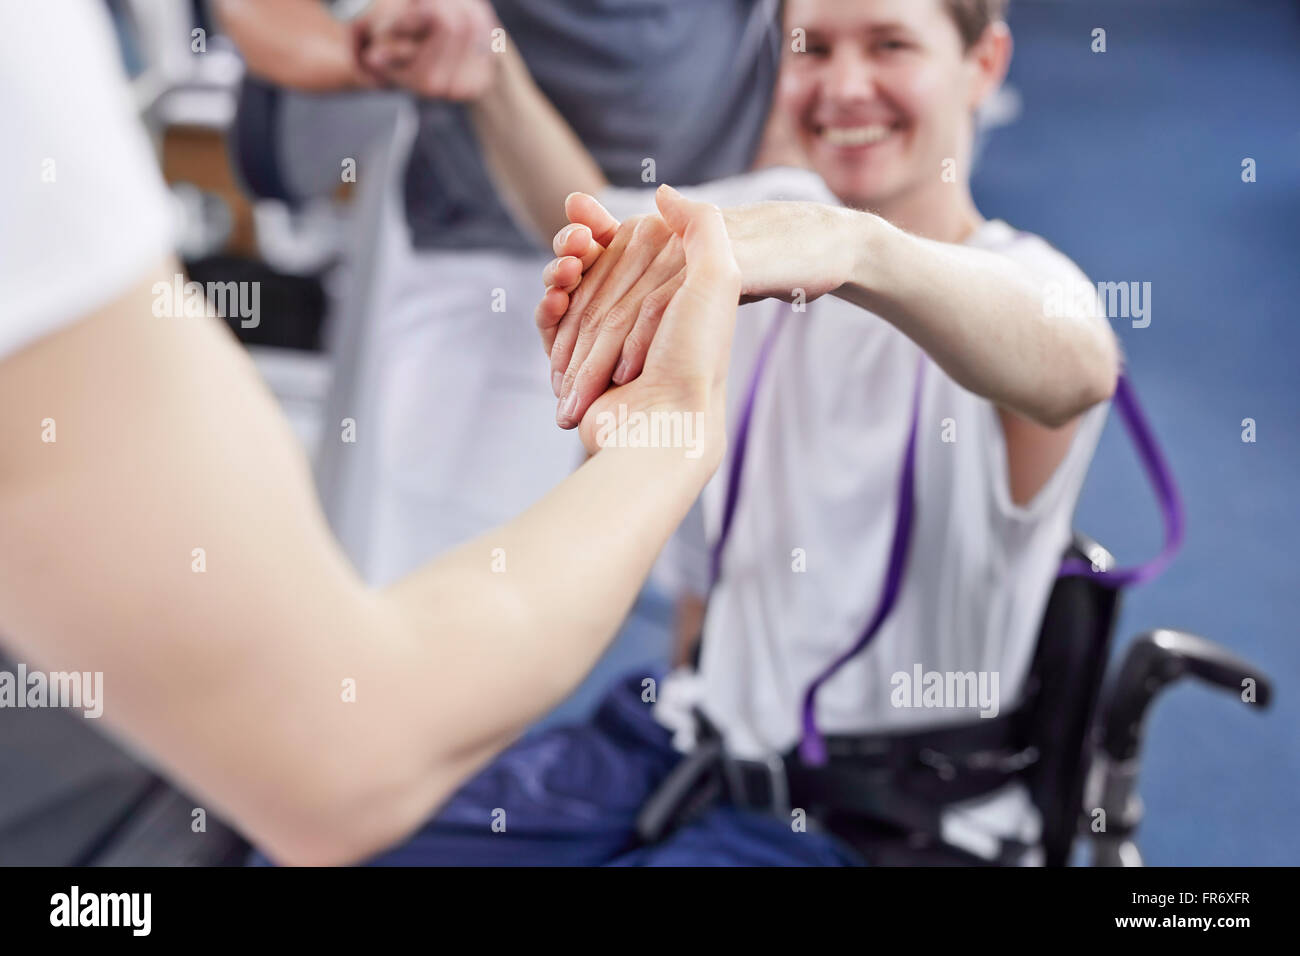 Physical therapist holding hands and lifting man Stock Photo